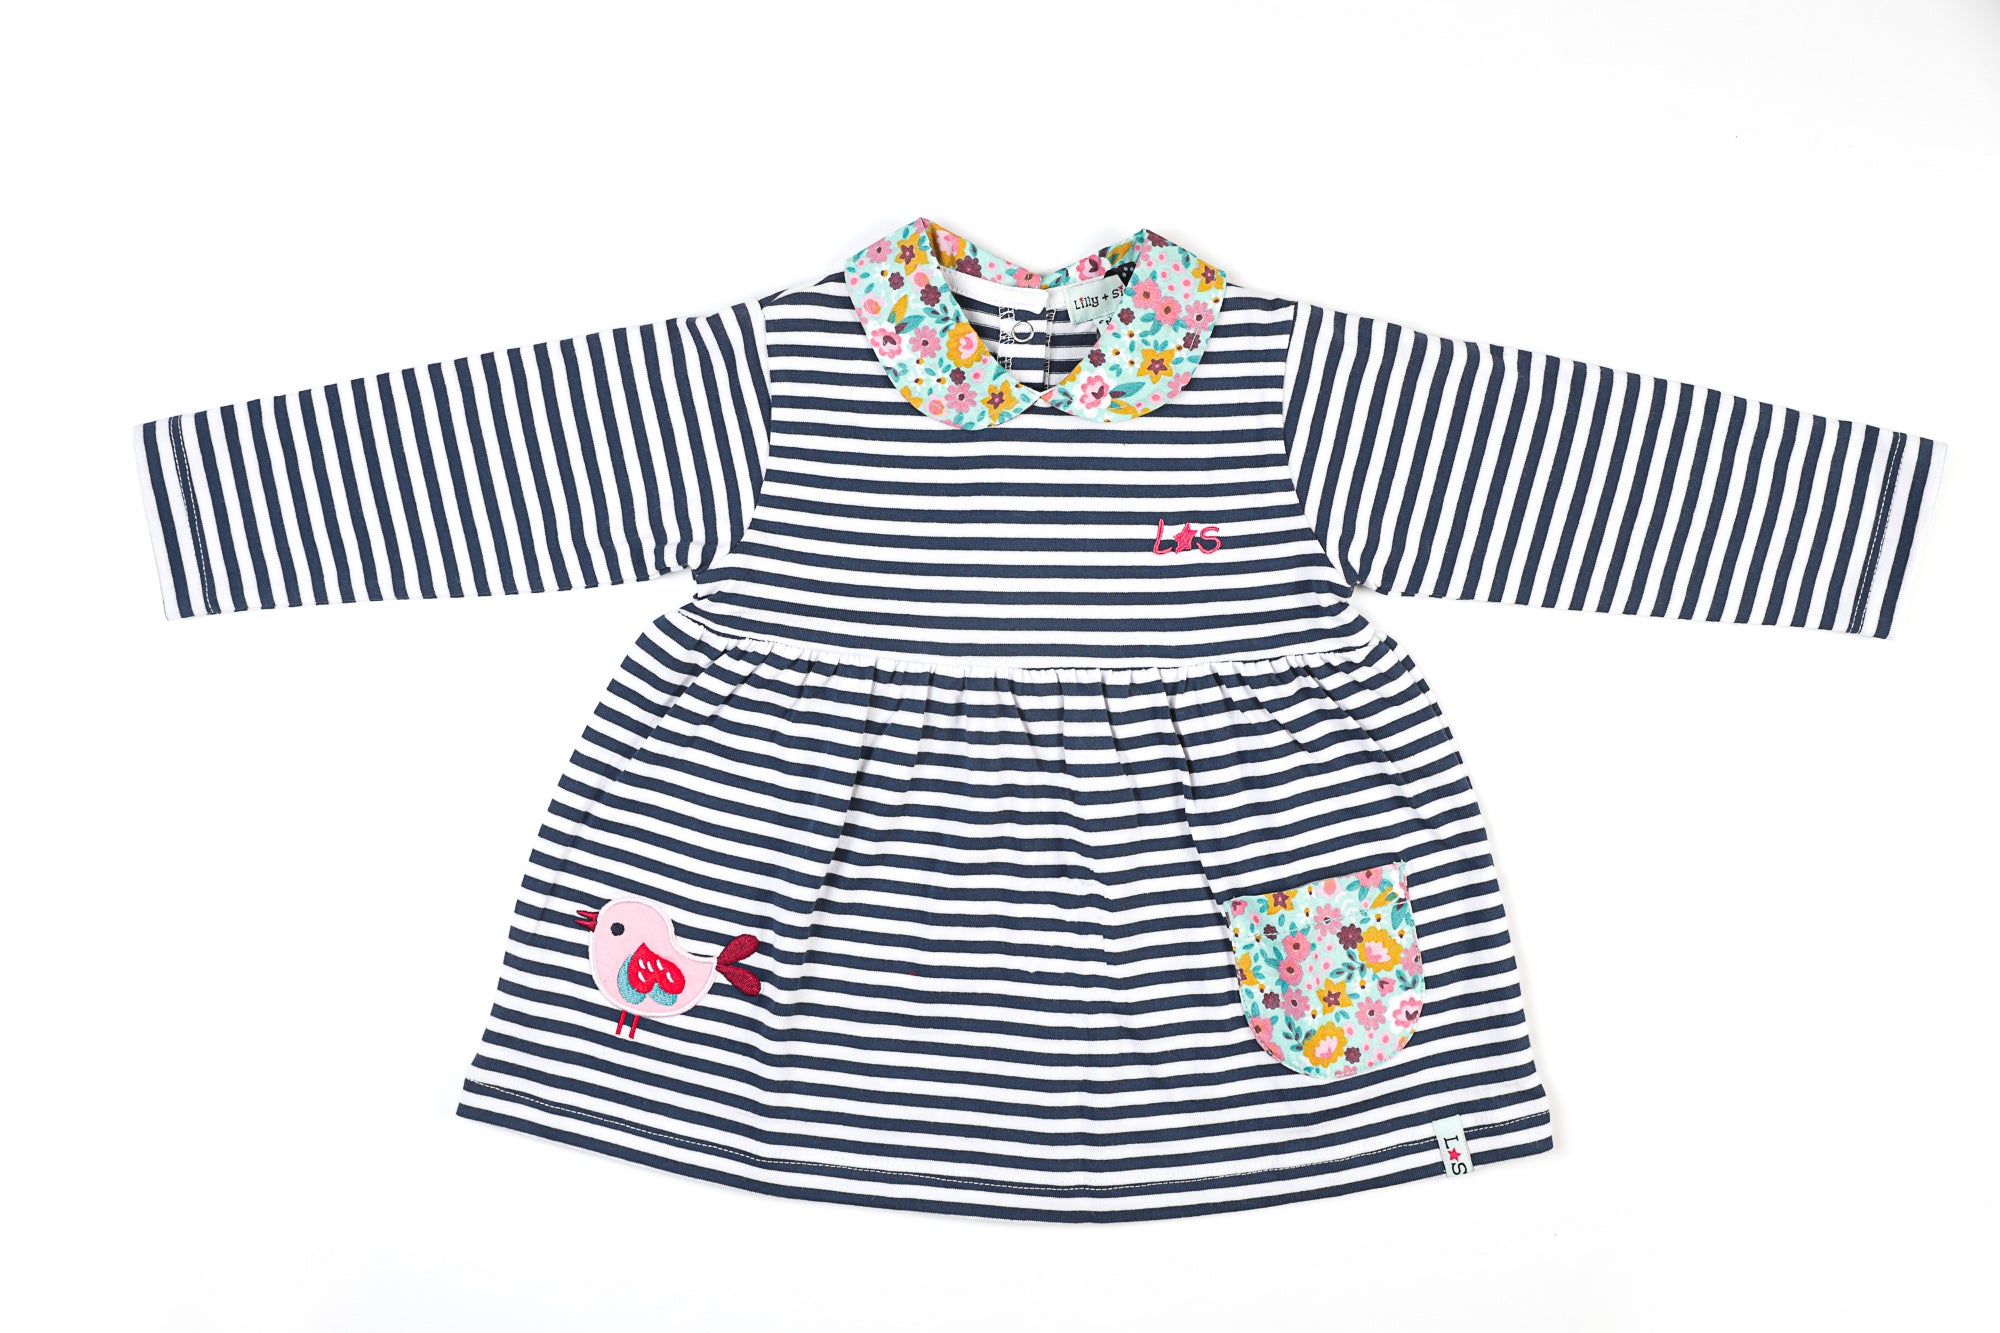 long sleeves striped dress for baby girl with floral collar and a front pocket